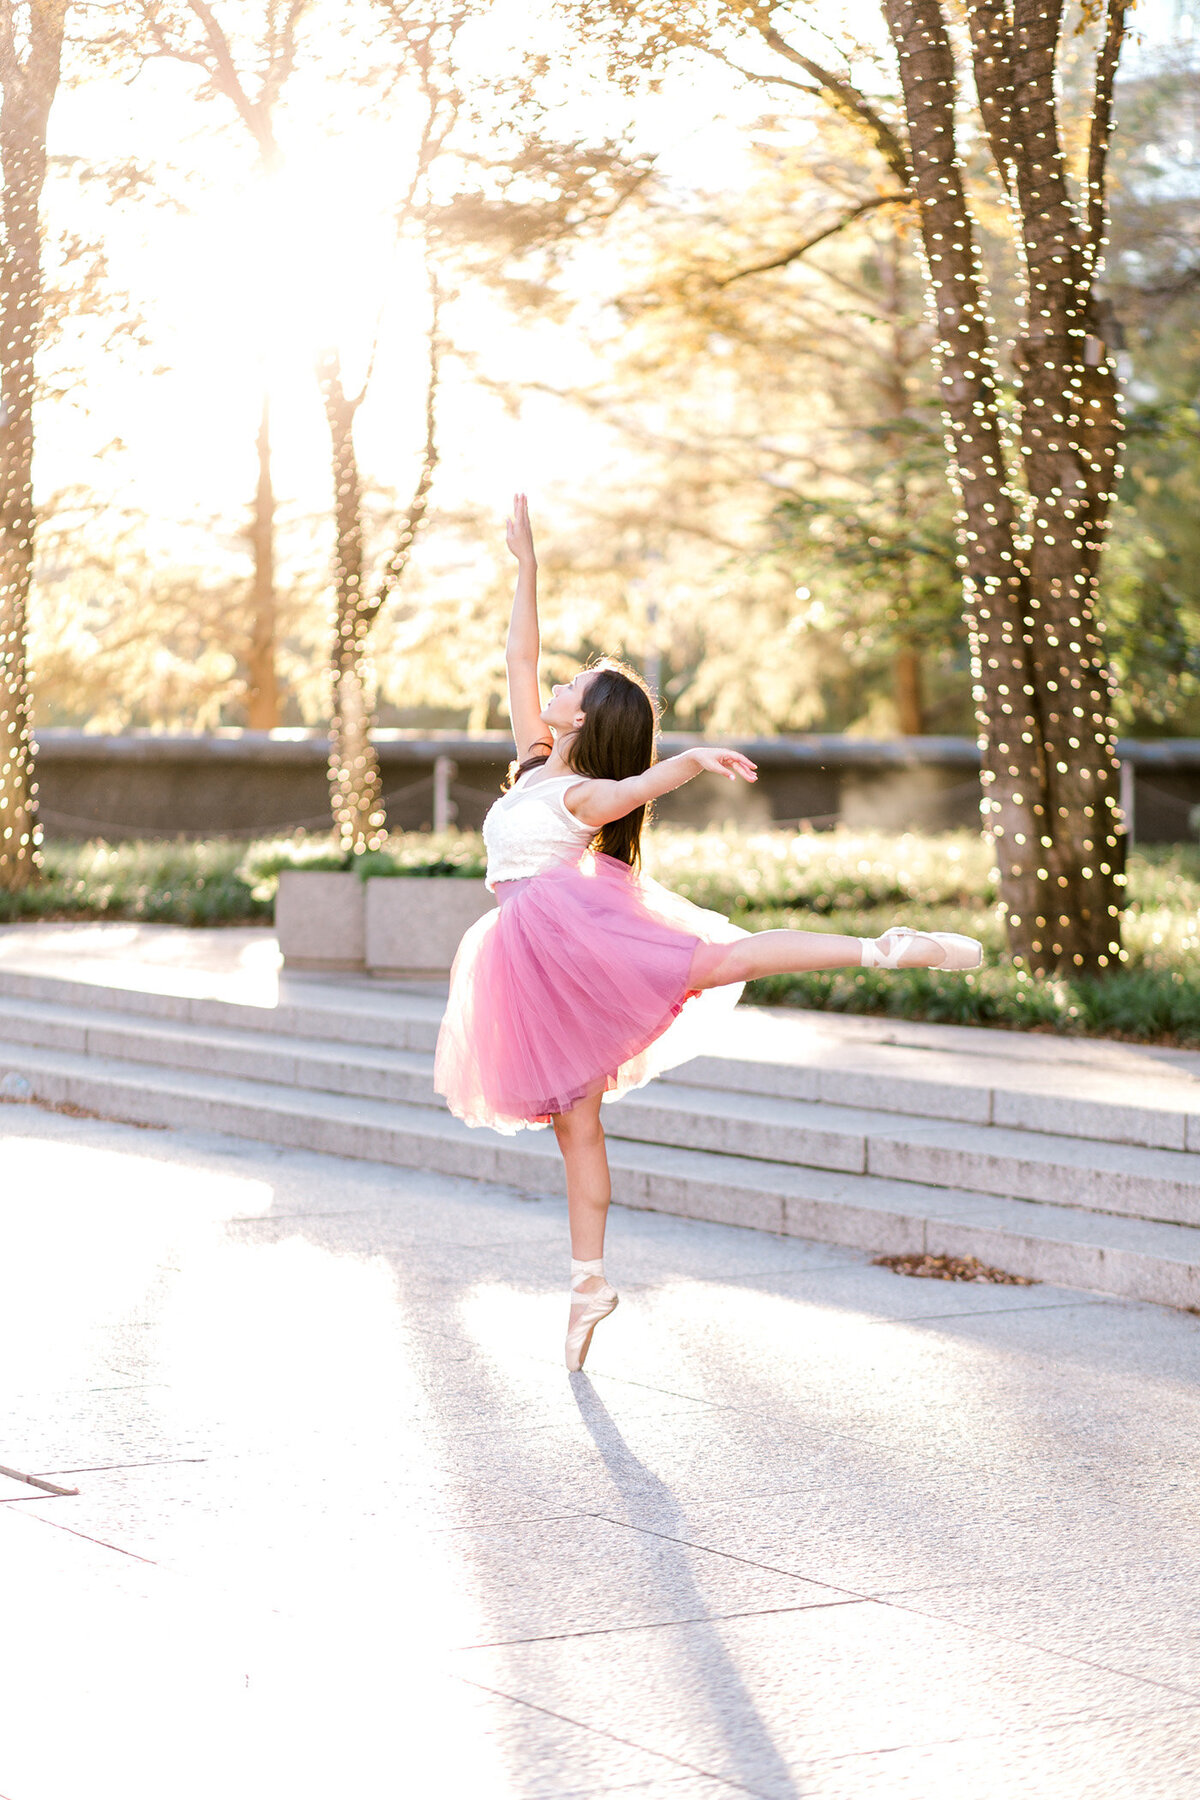 Dallas TX Dancer Photographer | Laylee Emadi Photography | Maddie Dance Session - 57